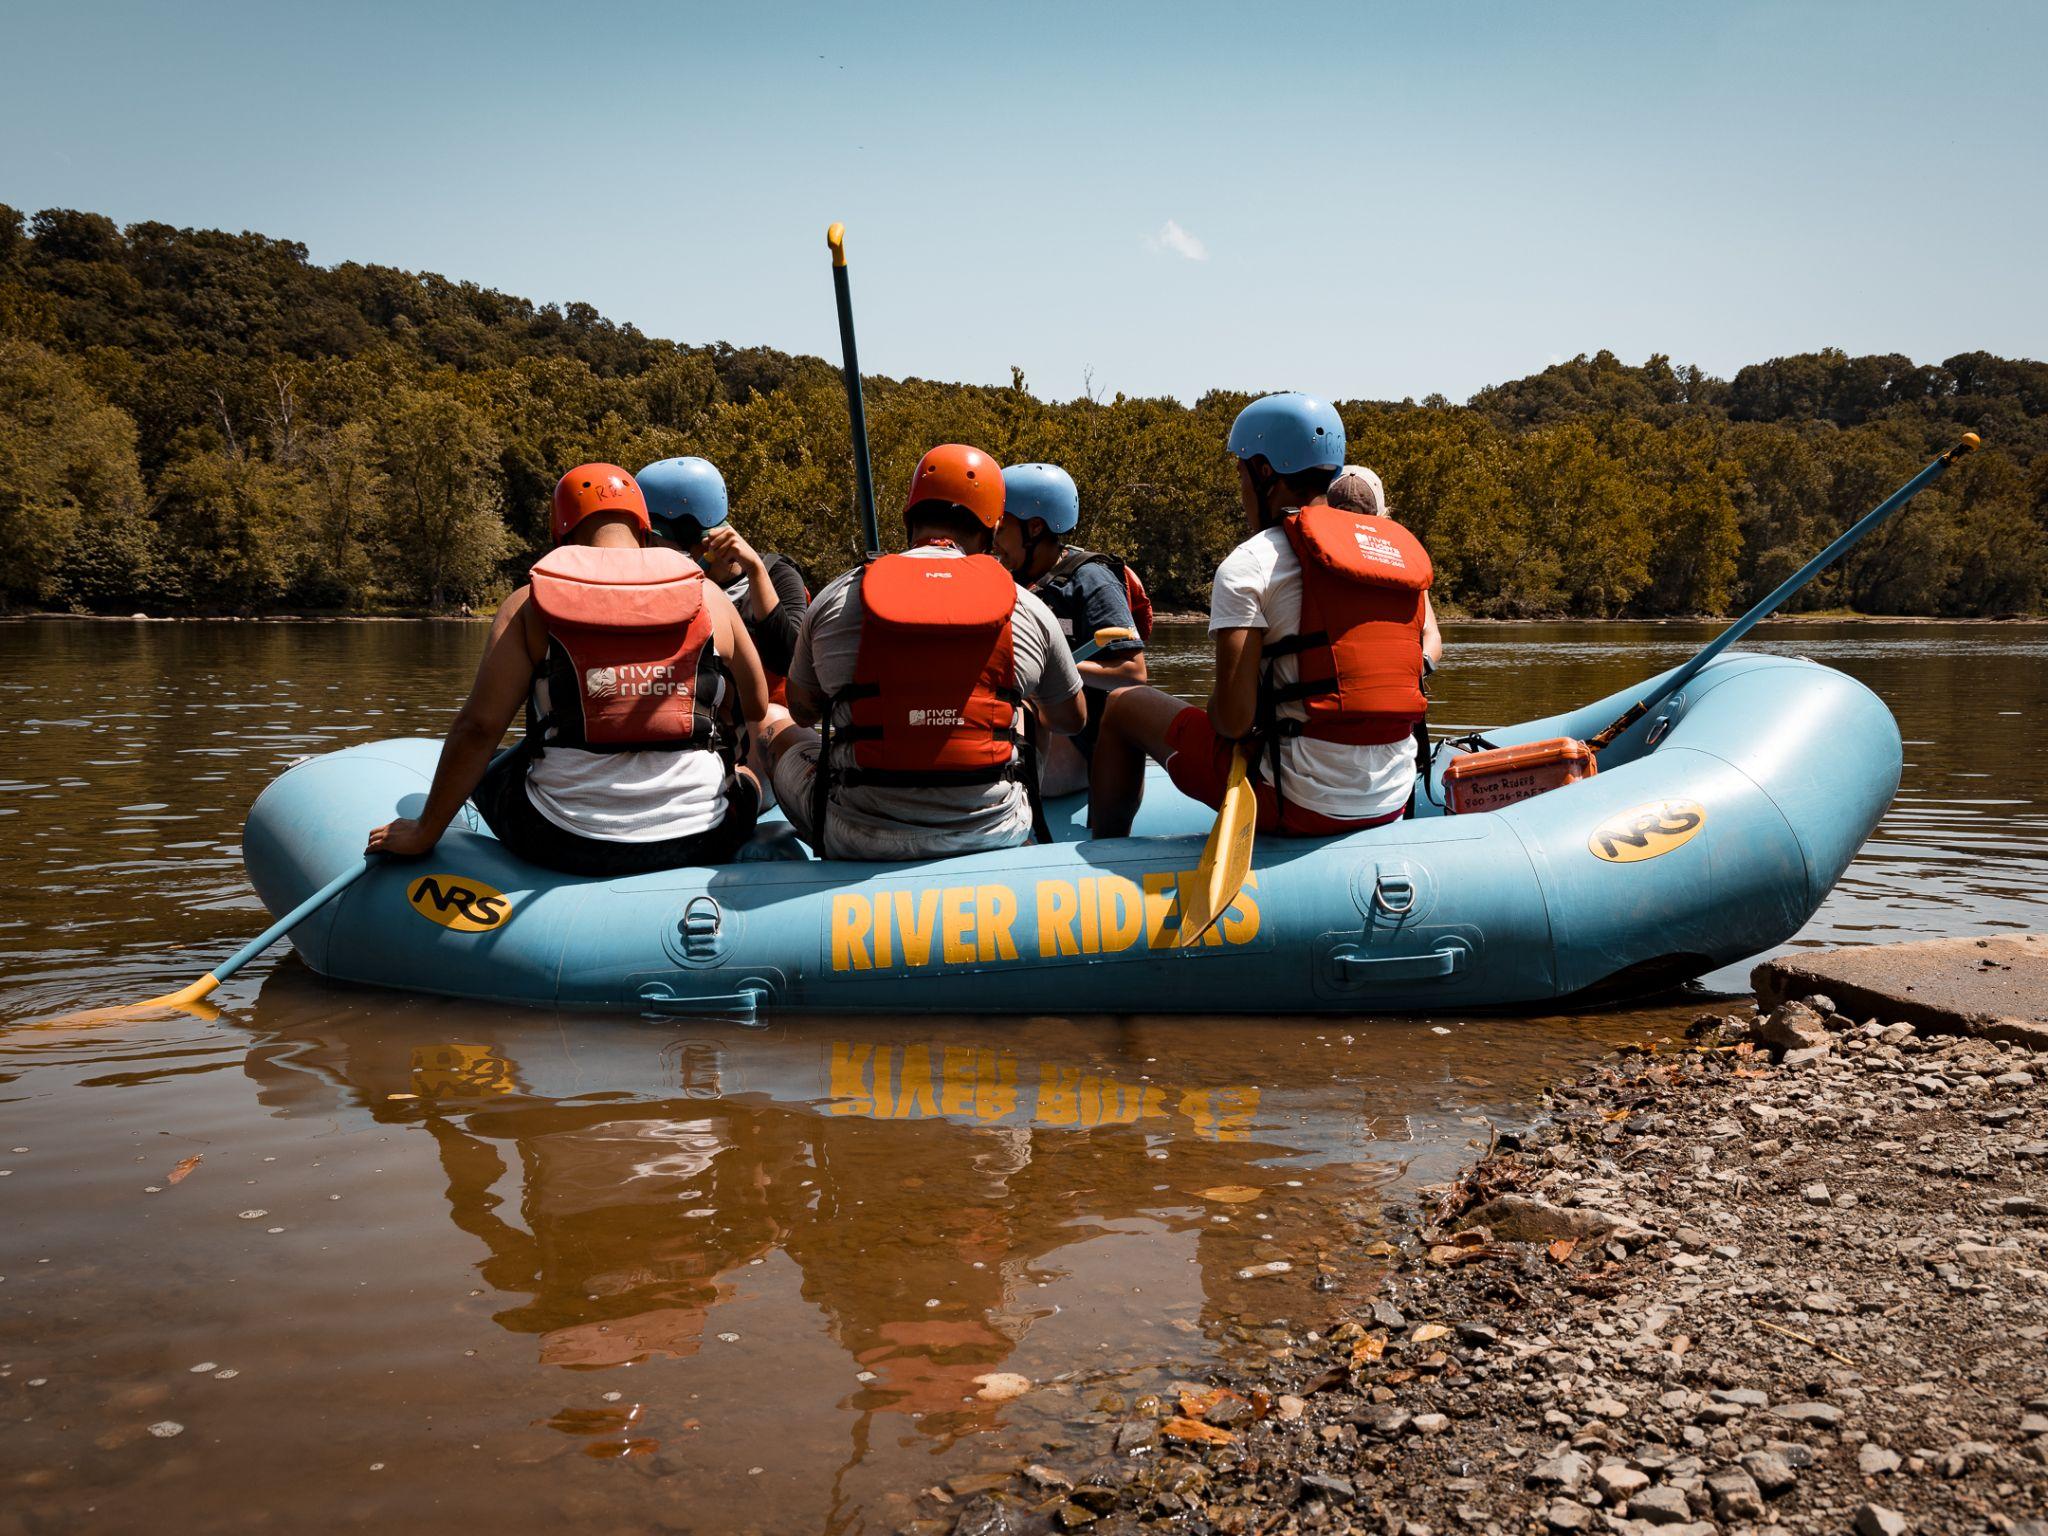 River Riders: Year round activities and fun with help of long standing partnership with the WV SBDC